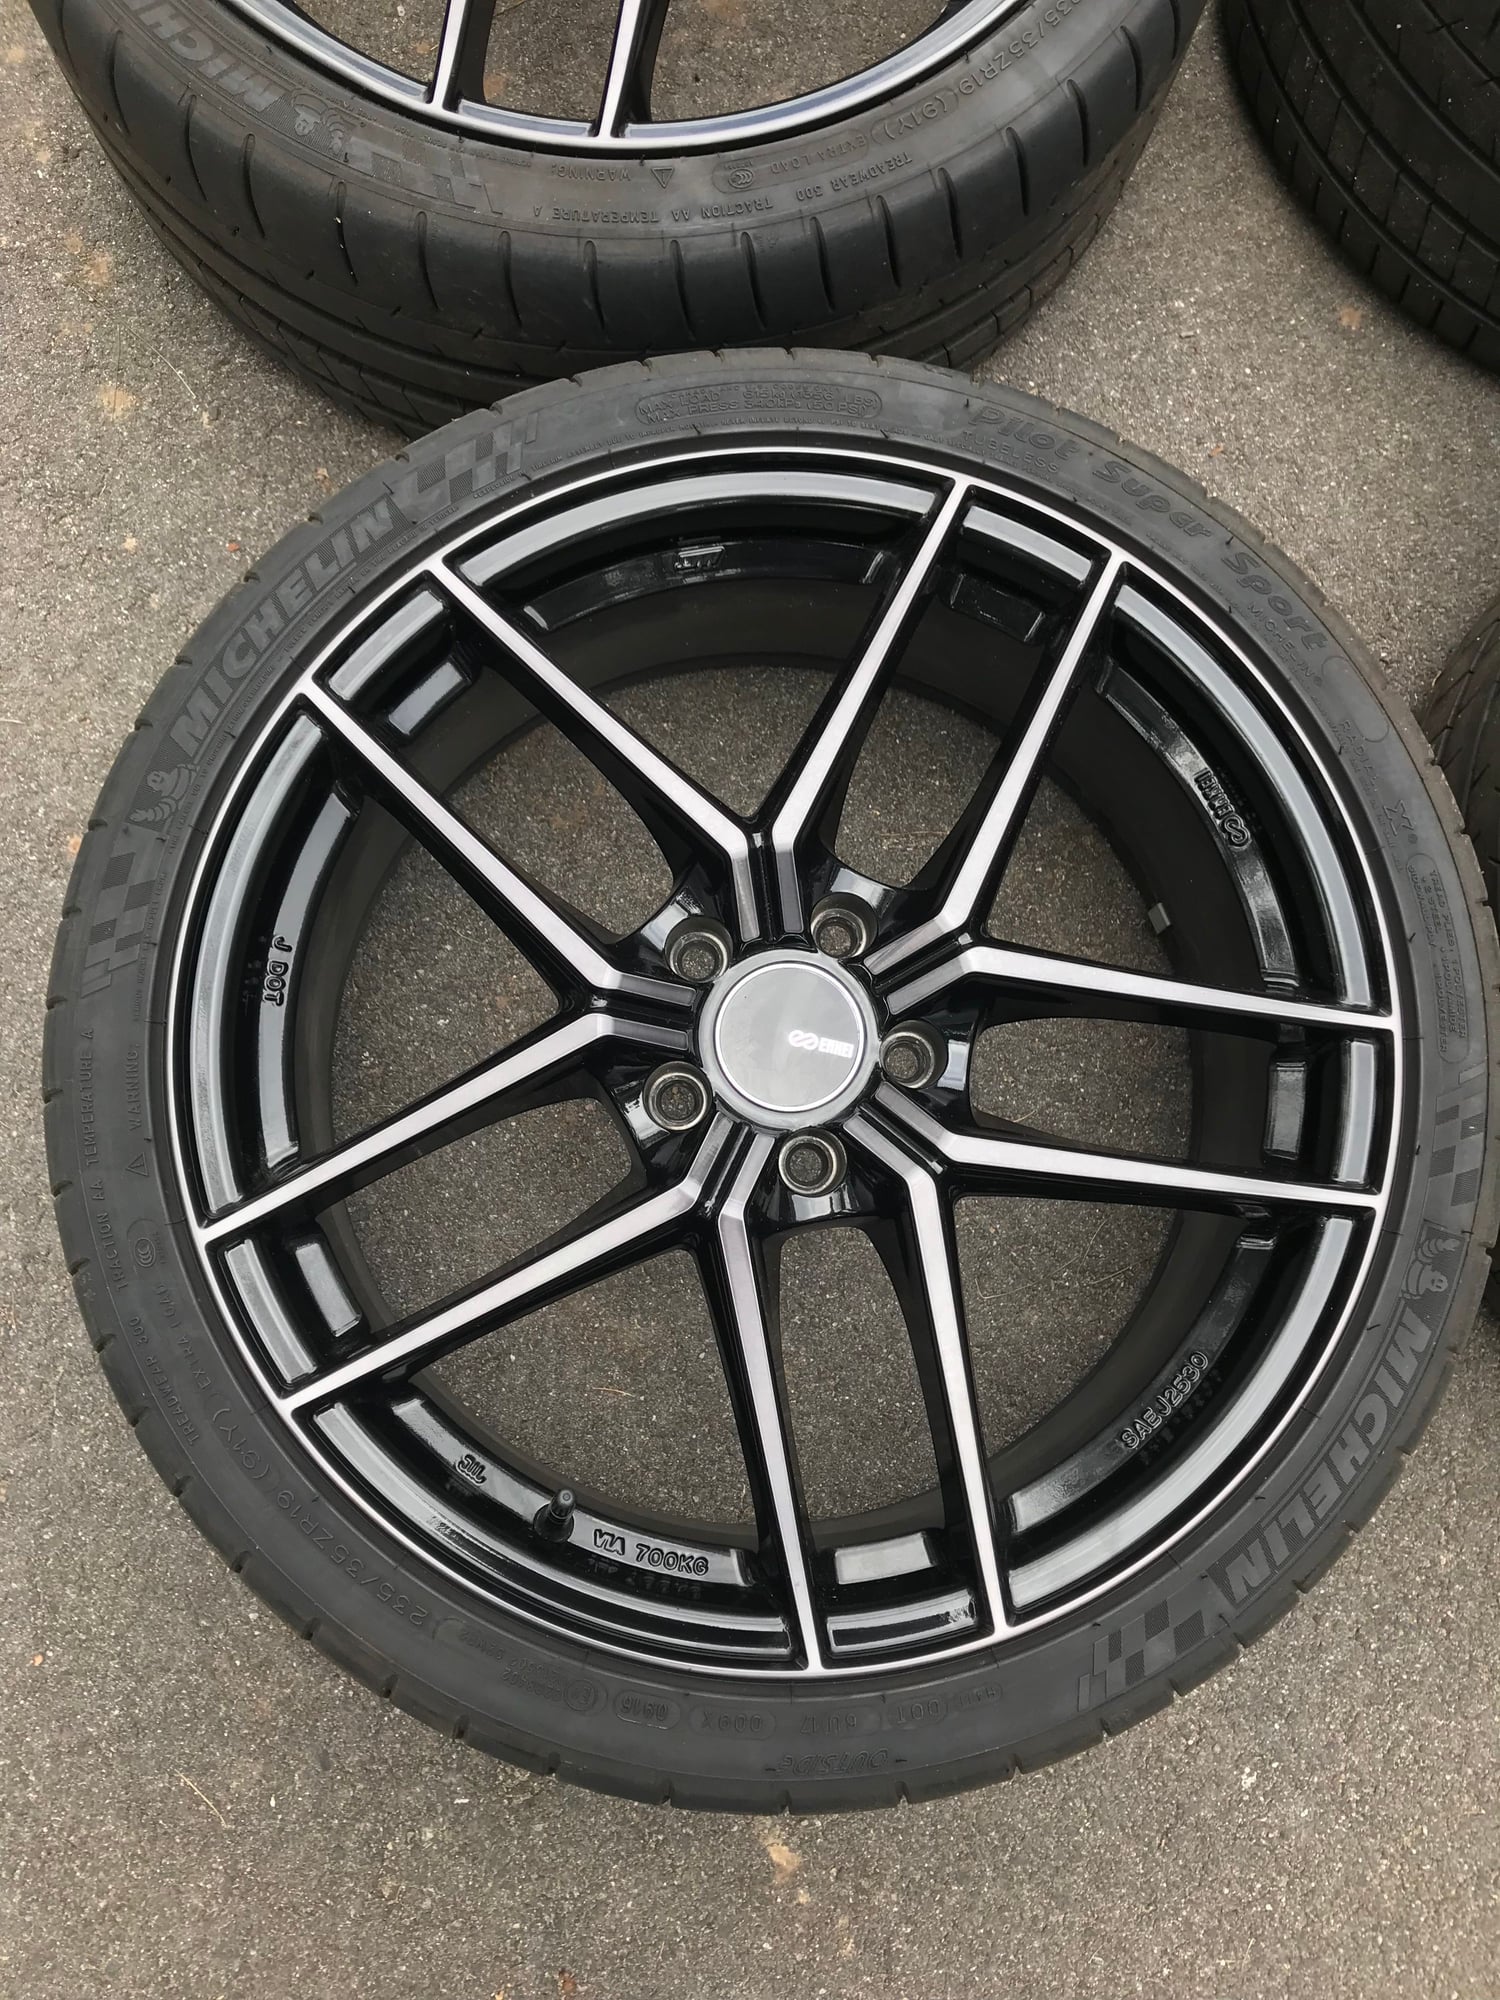 Wheels and Tires/Axles - 19" Enkei TY-5 wheels with Michelin Pilot Super Sport tires - Used - Medfield, MA 02052, United States